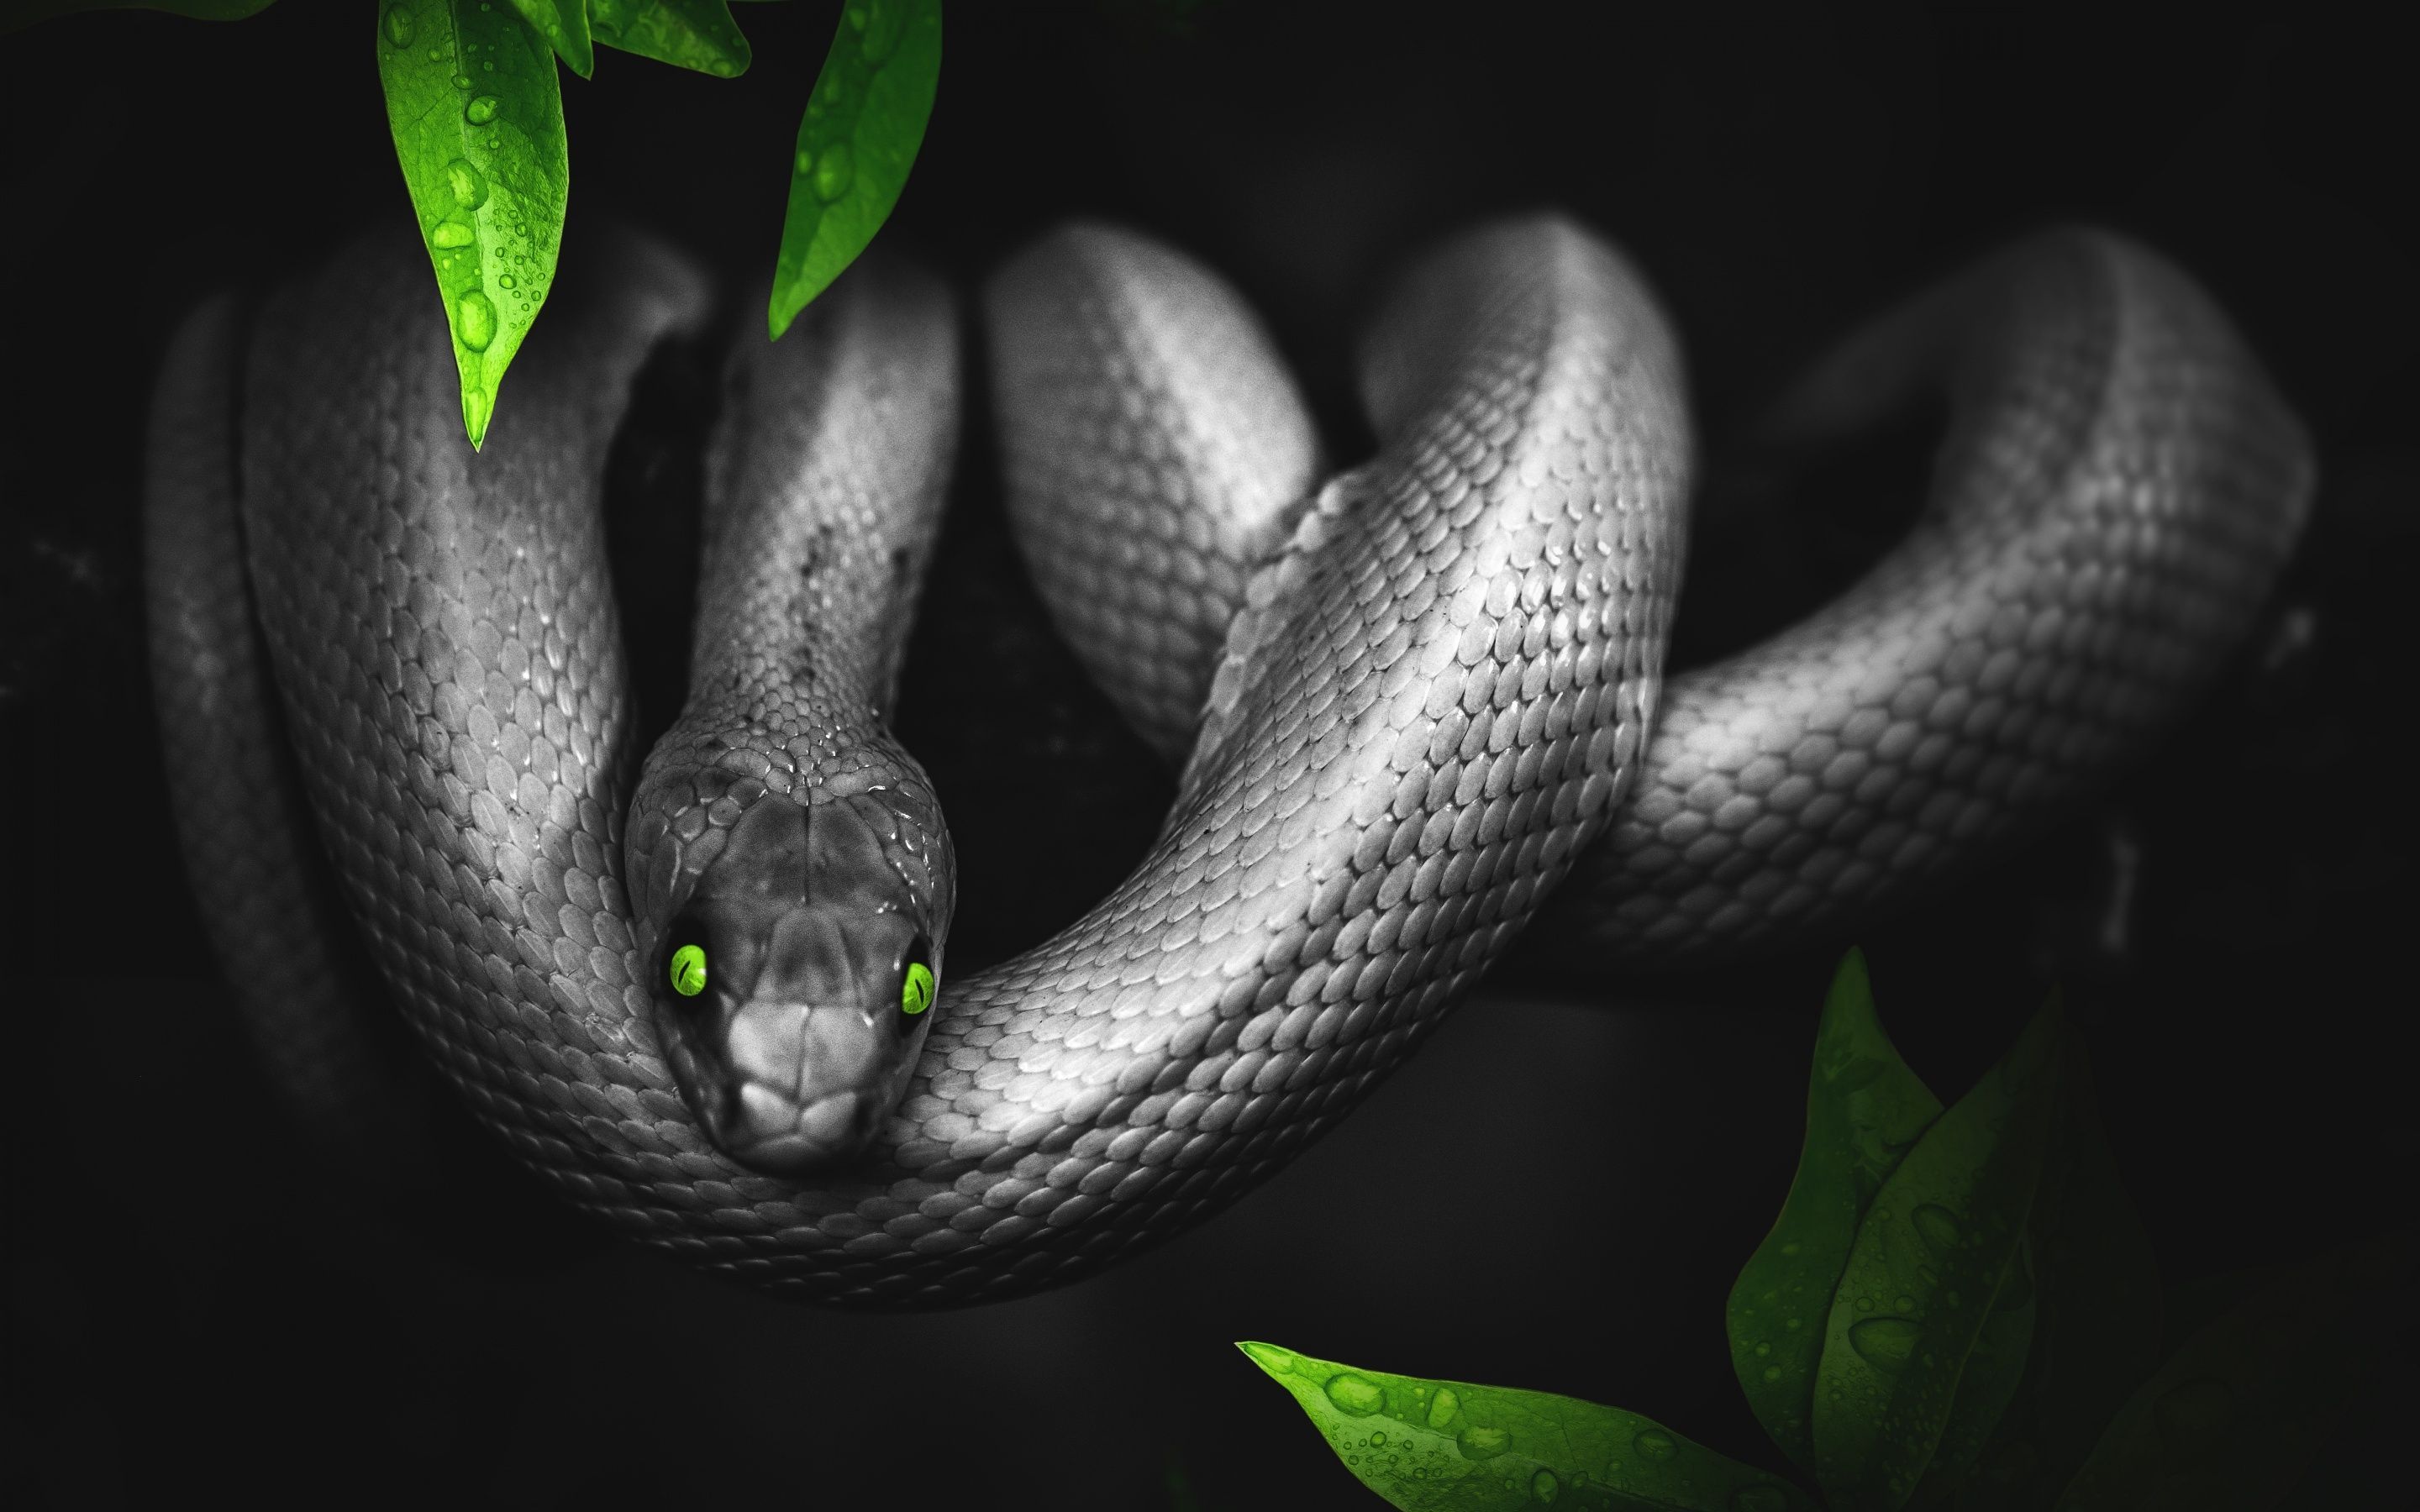 Black snake with green eyes on a green plant - Snake